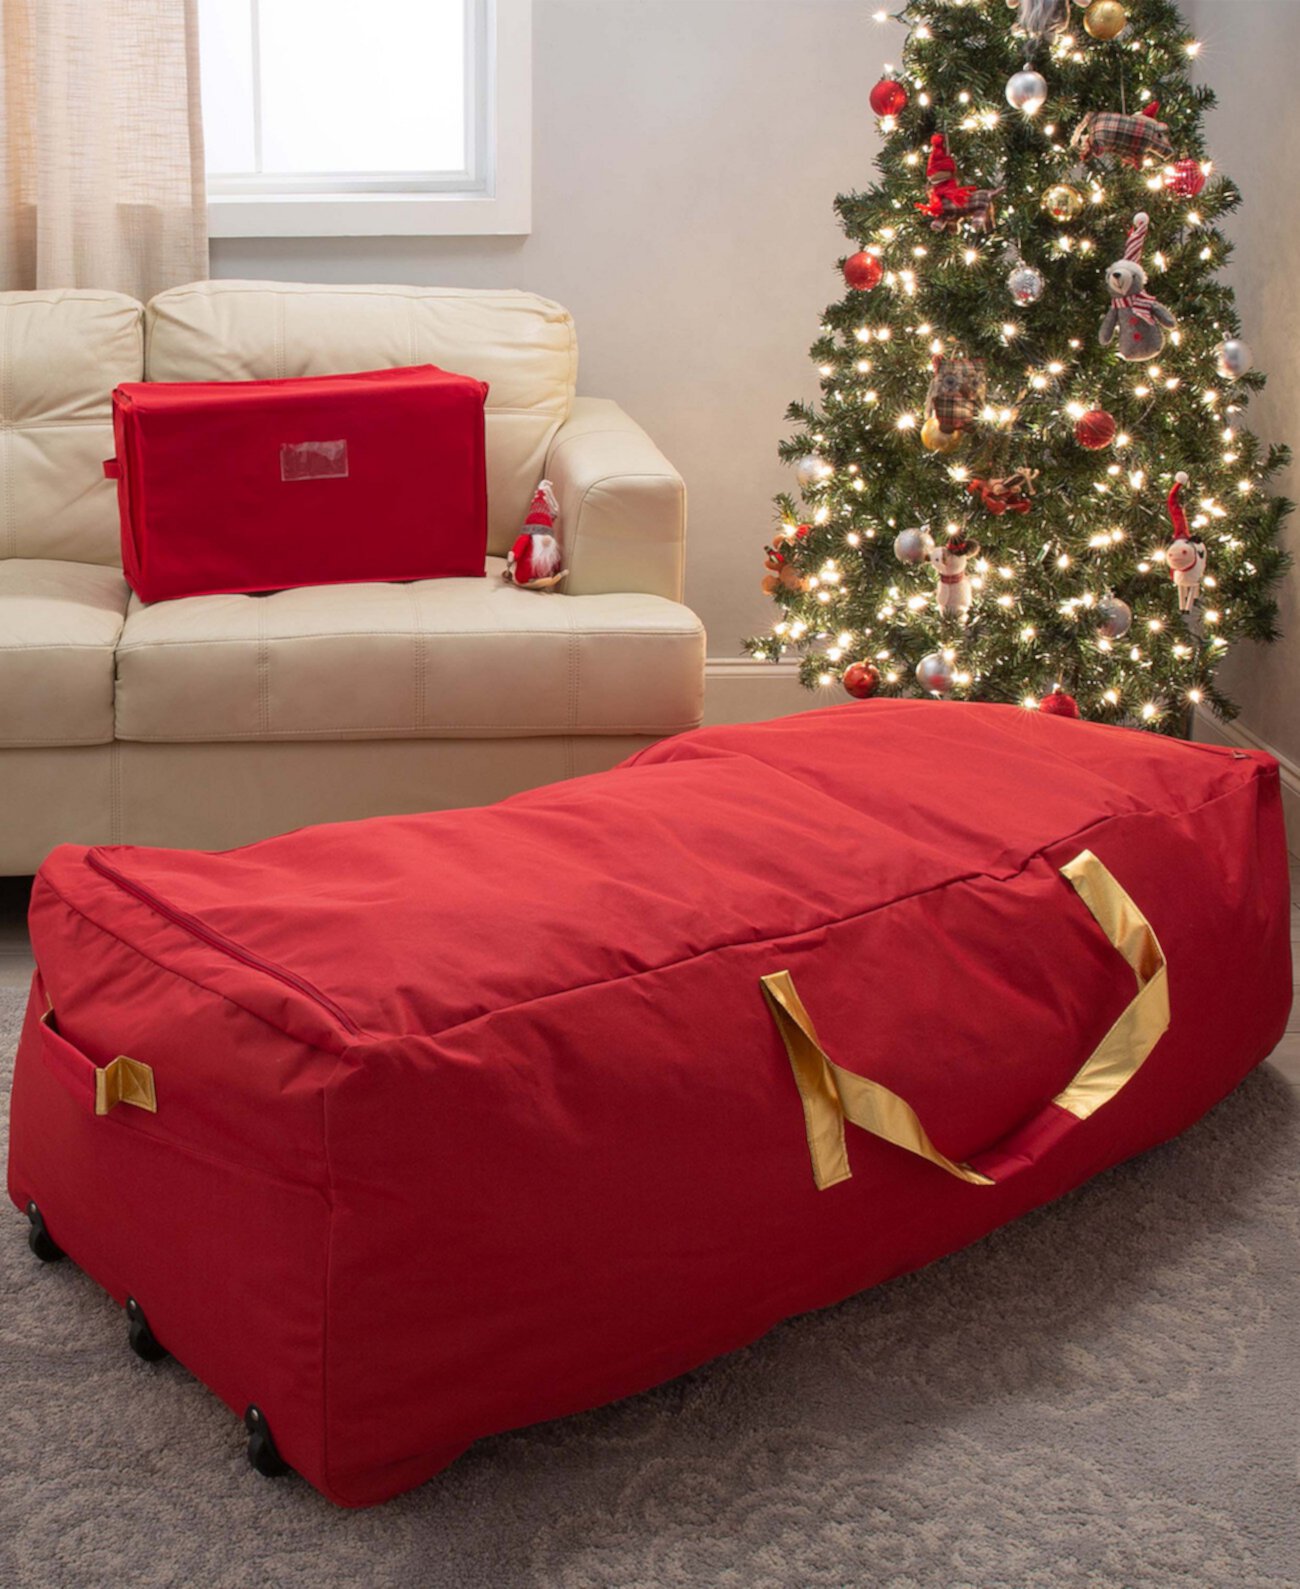 The Holiday Collection Storage Bag with Wheels Simplify